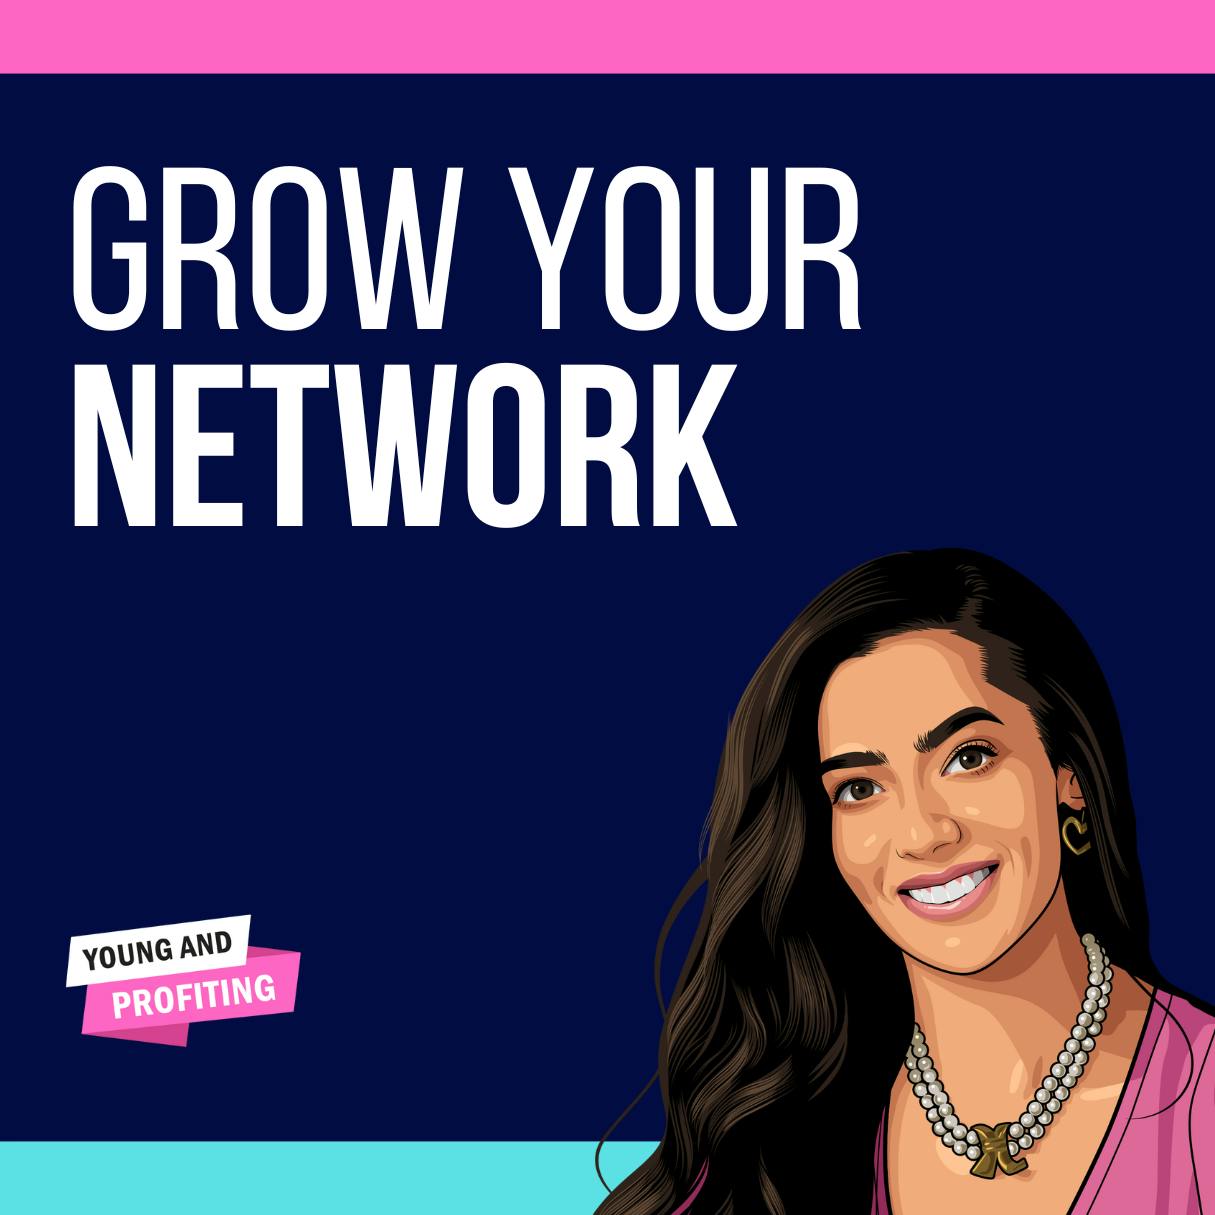 Hala Taha: Growing Your Network, Building Your Personal Brand, and Going Viral on LinkedIn by Hala Taha | YAP Media Network